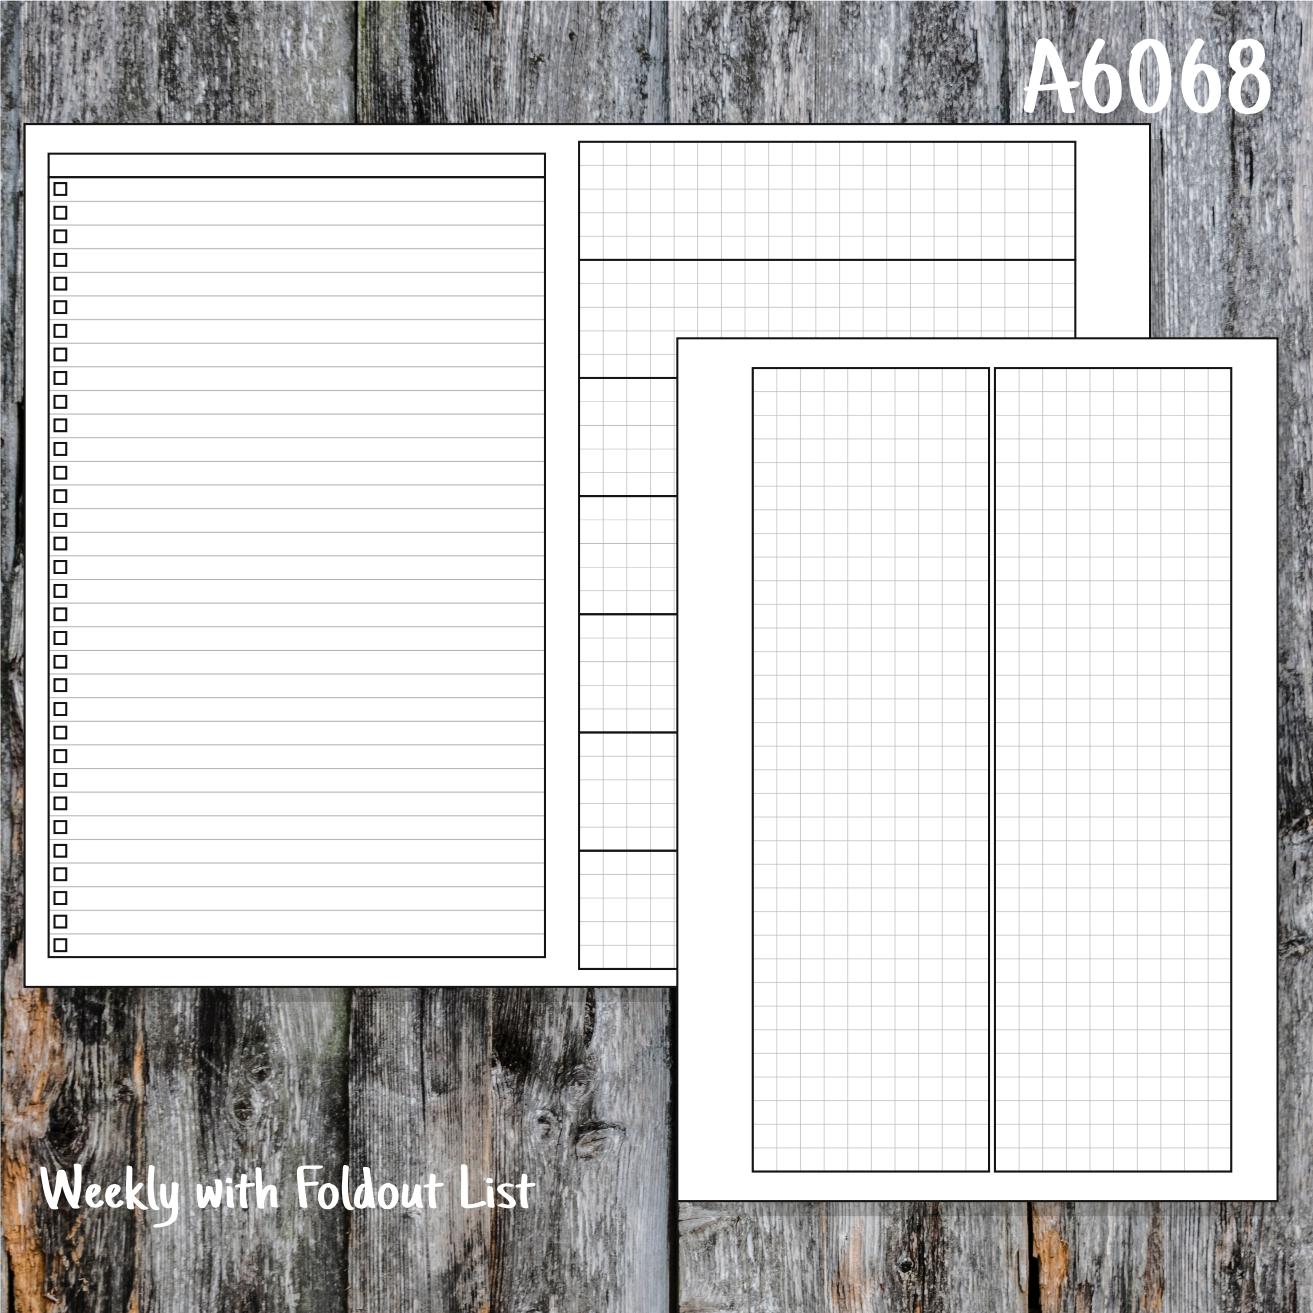 A6068 Weekly with Foldout List